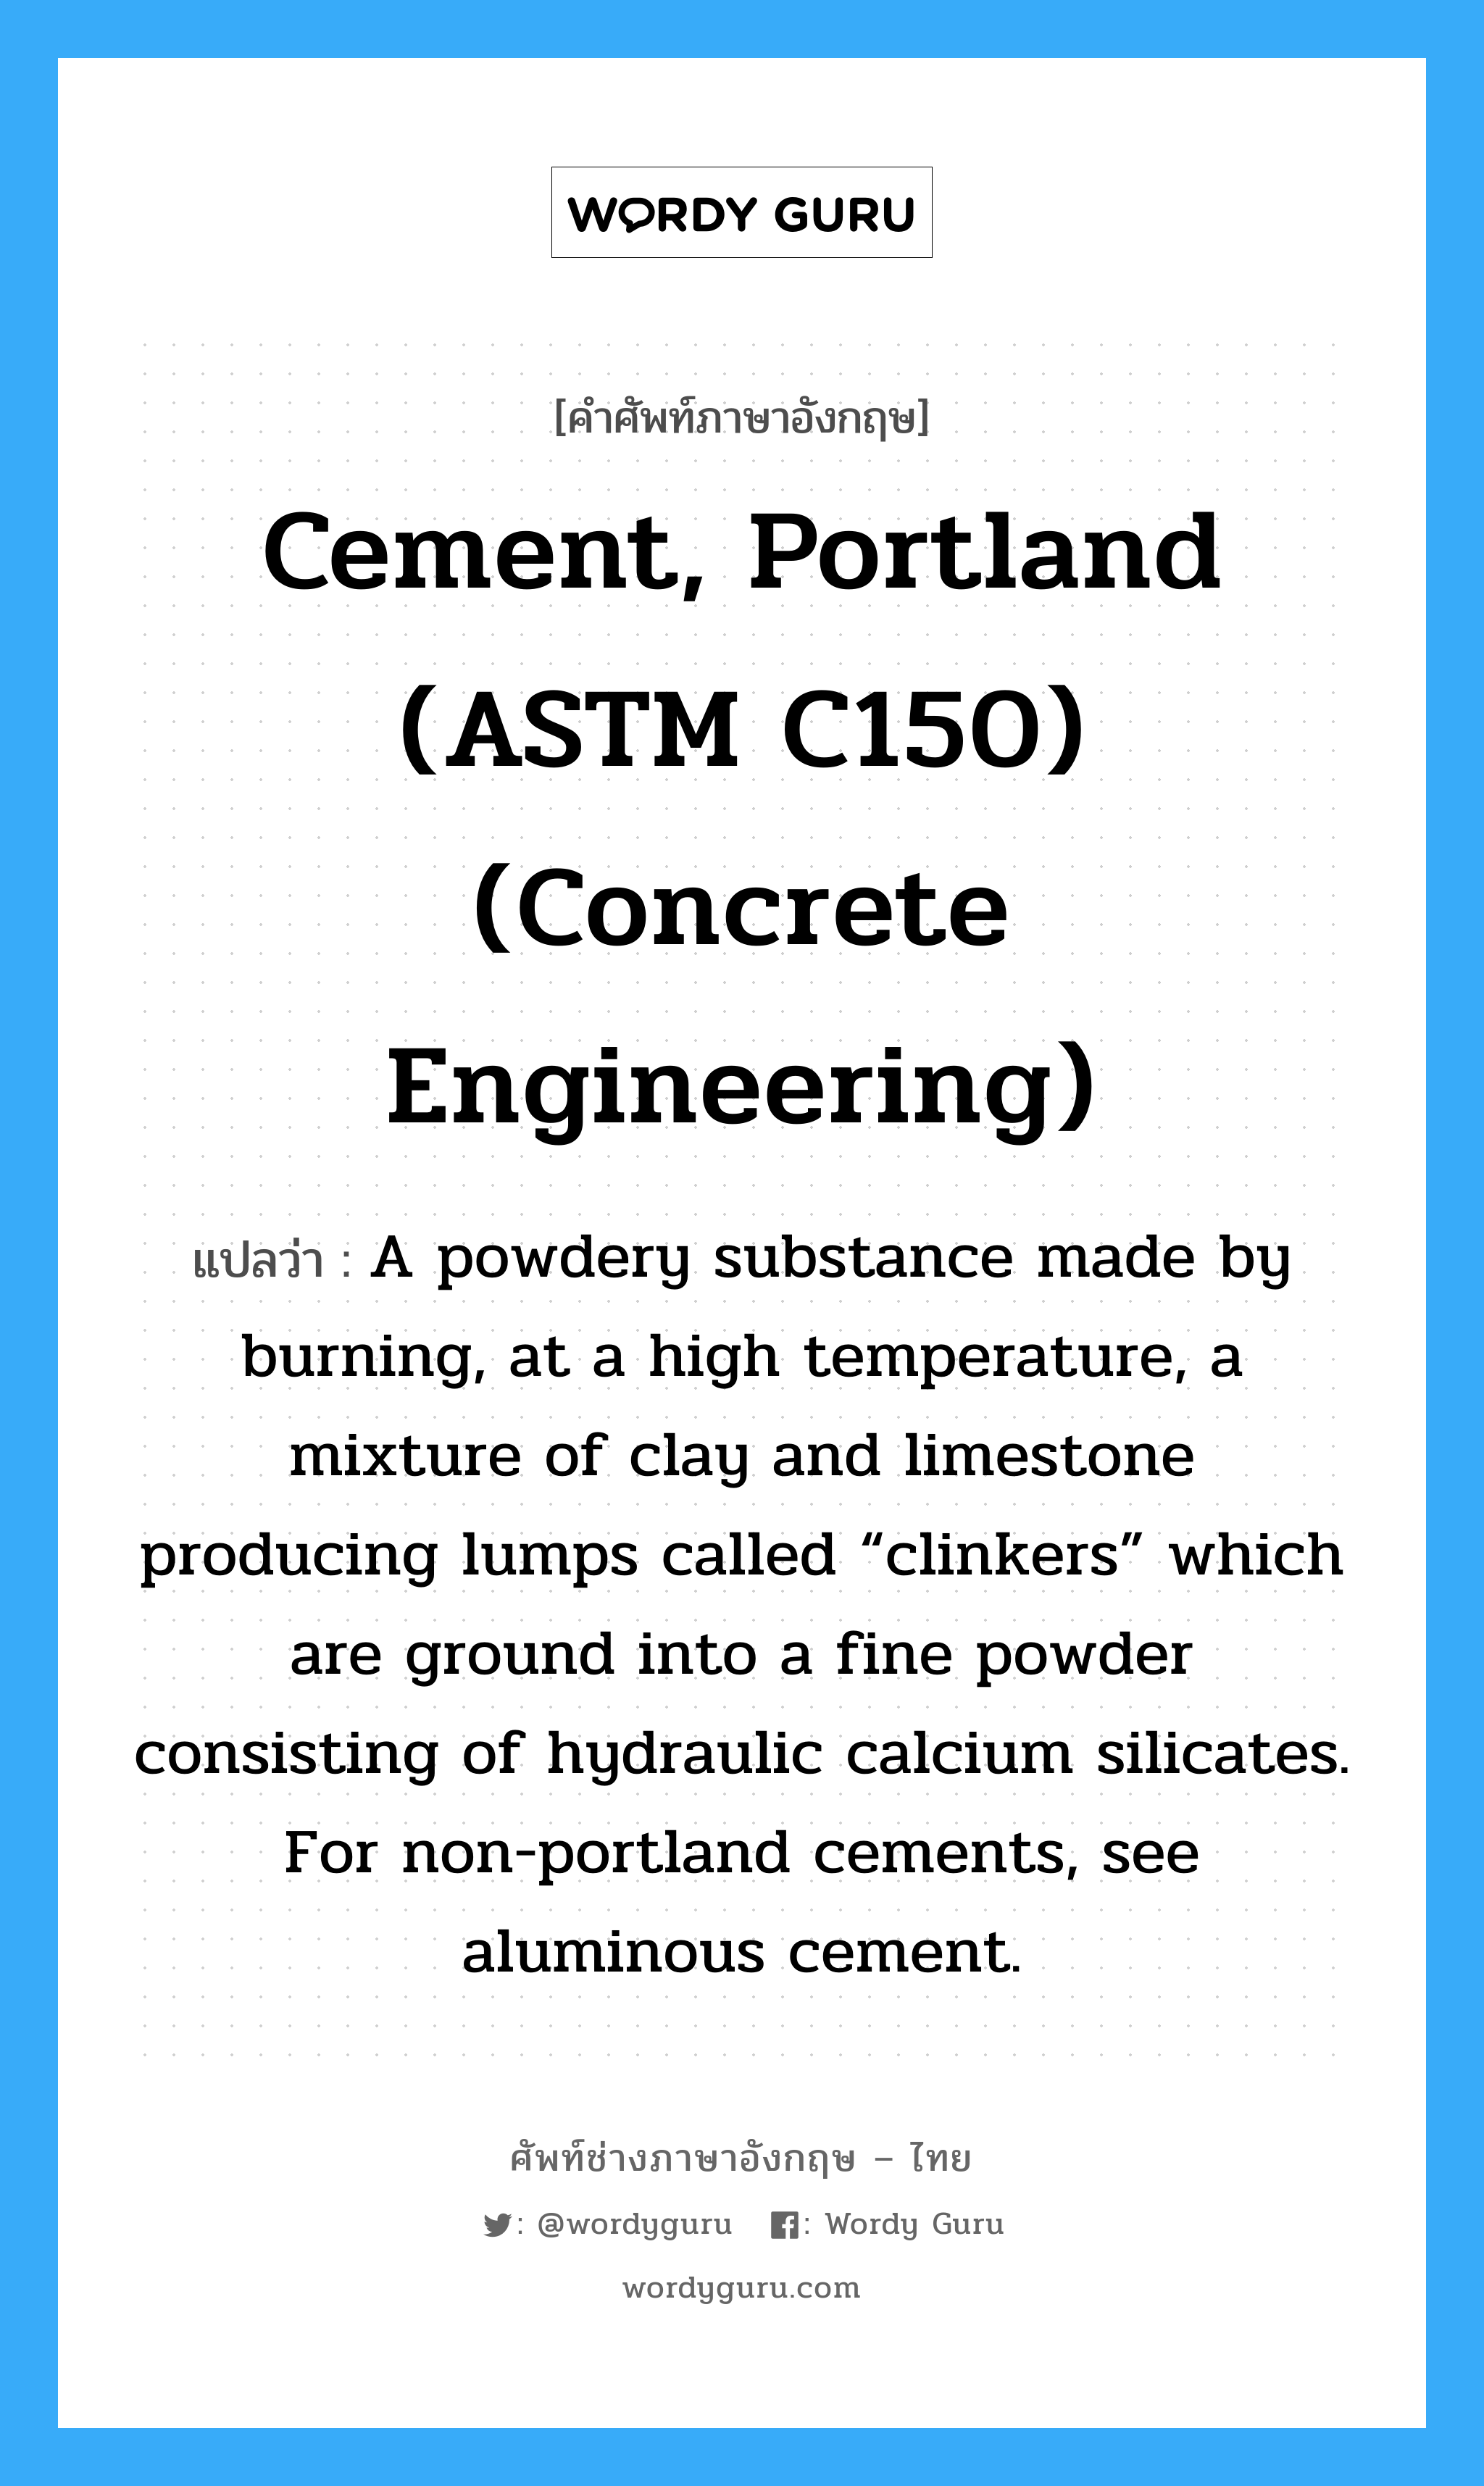 Cement, Portland (ASTM C150) (Concrete Engineering) แปลว่า?, คำศัพท์ช่างภาษาอังกฤษ - ไทย Cement, Portland (ASTM C150) (Concrete Engineering) คำศัพท์ภาษาอังกฤษ Cement, Portland (ASTM C150) (Concrete Engineering) แปลว่า A powdery substance made by burning, at a high temperature, a mixture of clay and limestone producing lumps called “clinkers” which are ground into a fine powder consisting of hydraulic calcium silicates. For non-portland cements, see aluminous cement.